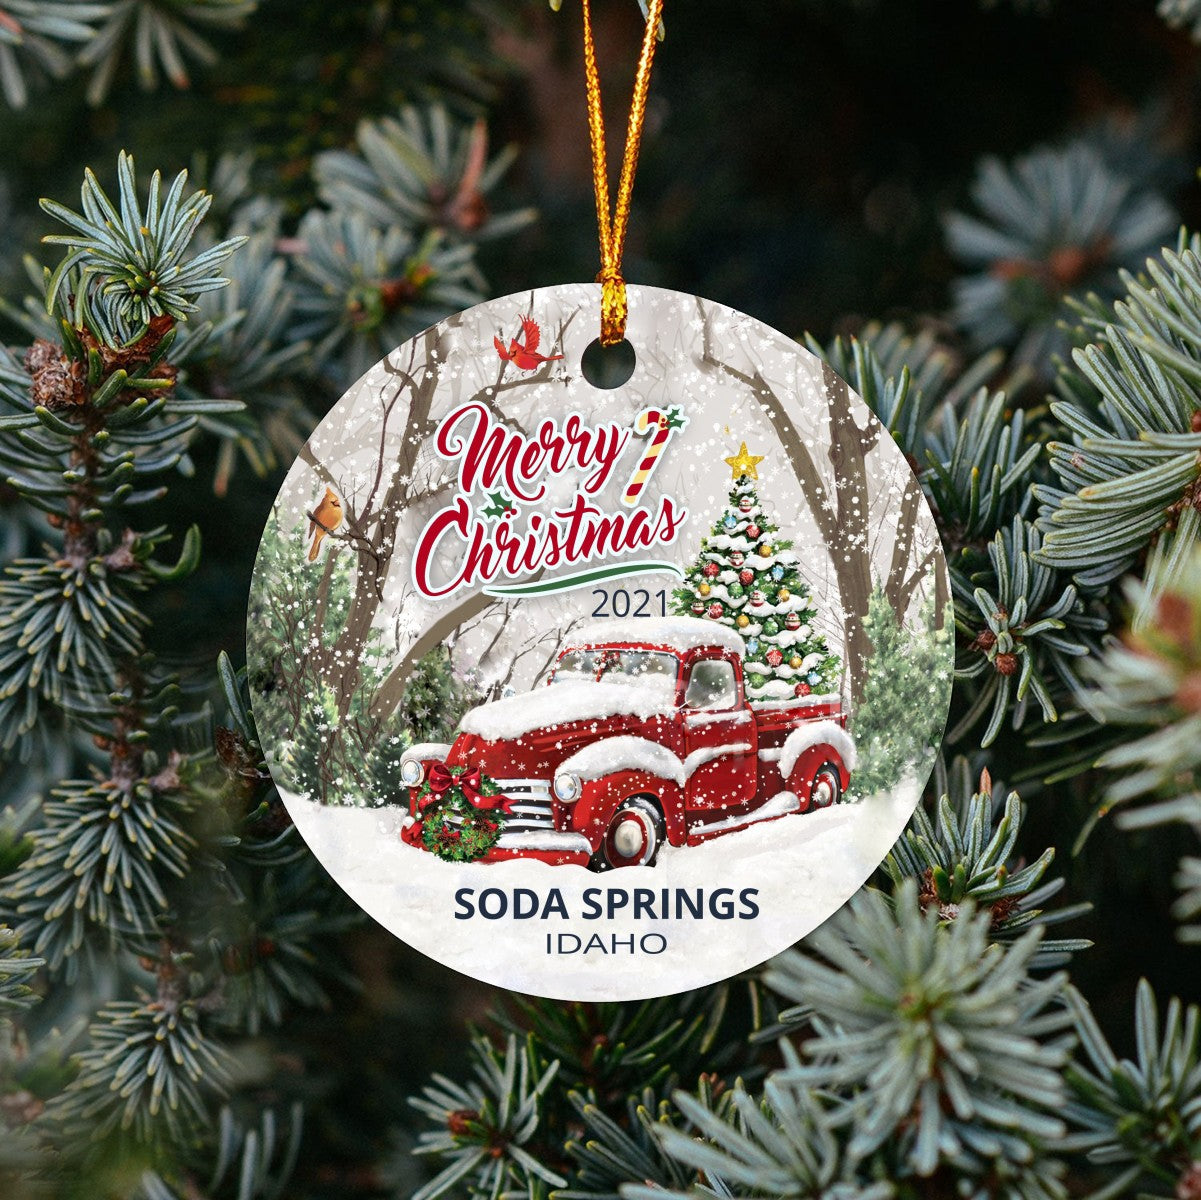 Christmas Tree Ornaments Soda Springs - Ornament With Name City, State Soda Springs Idaho ID Ornament - Red Truck Xmas Ornaments 3'' Plastic Gift For Family, Friend And Housewarming